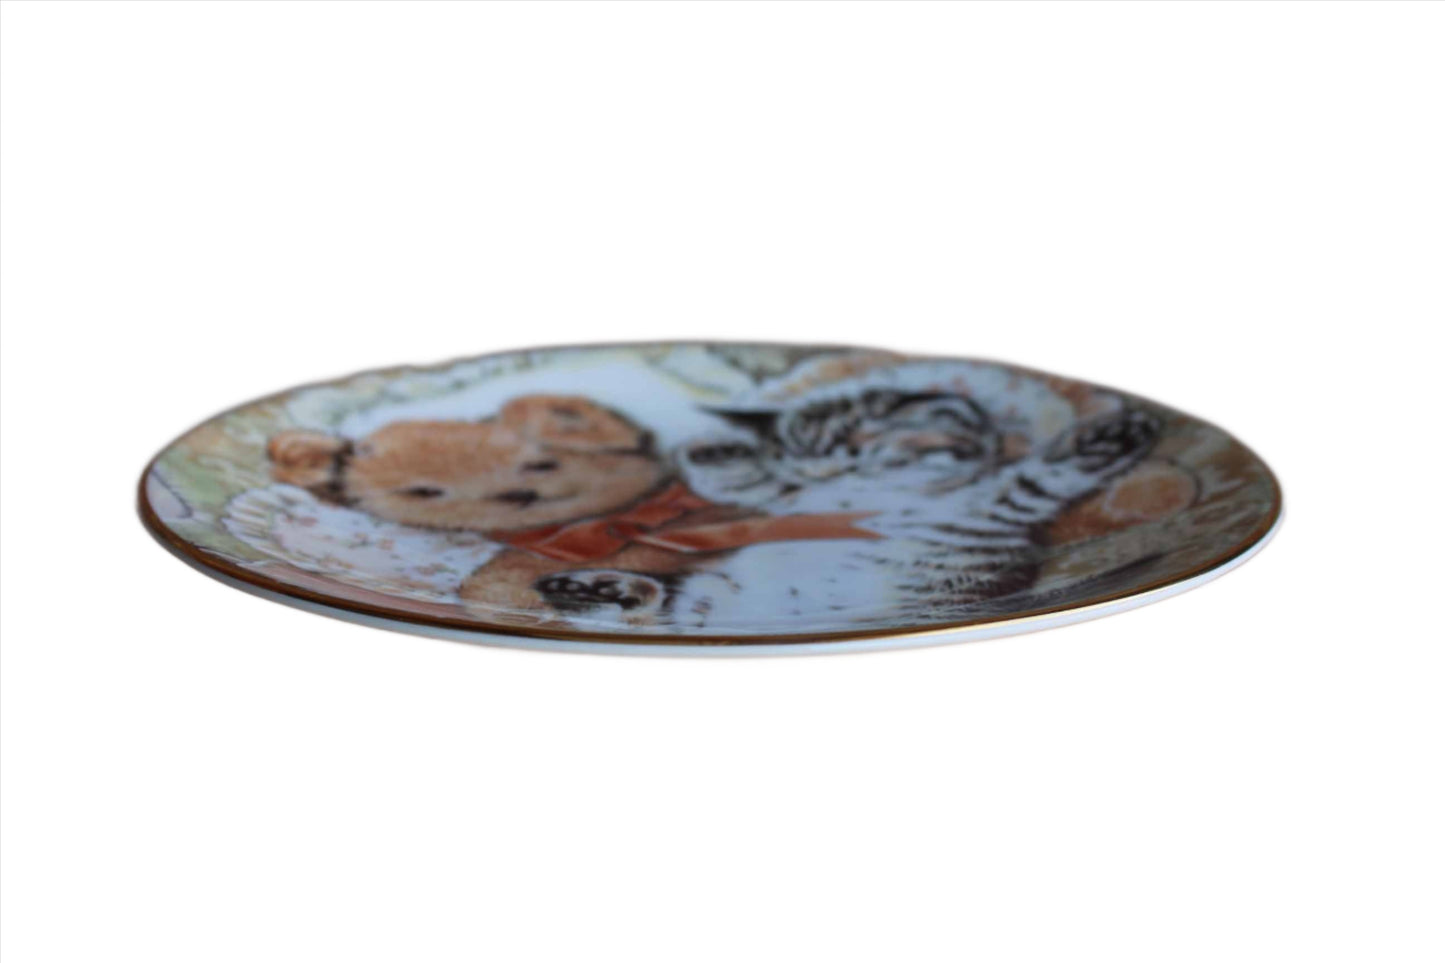 Royal Worcester Crown Ware (England) Bedtime Buddies by Pam Cooper Decorative Plate